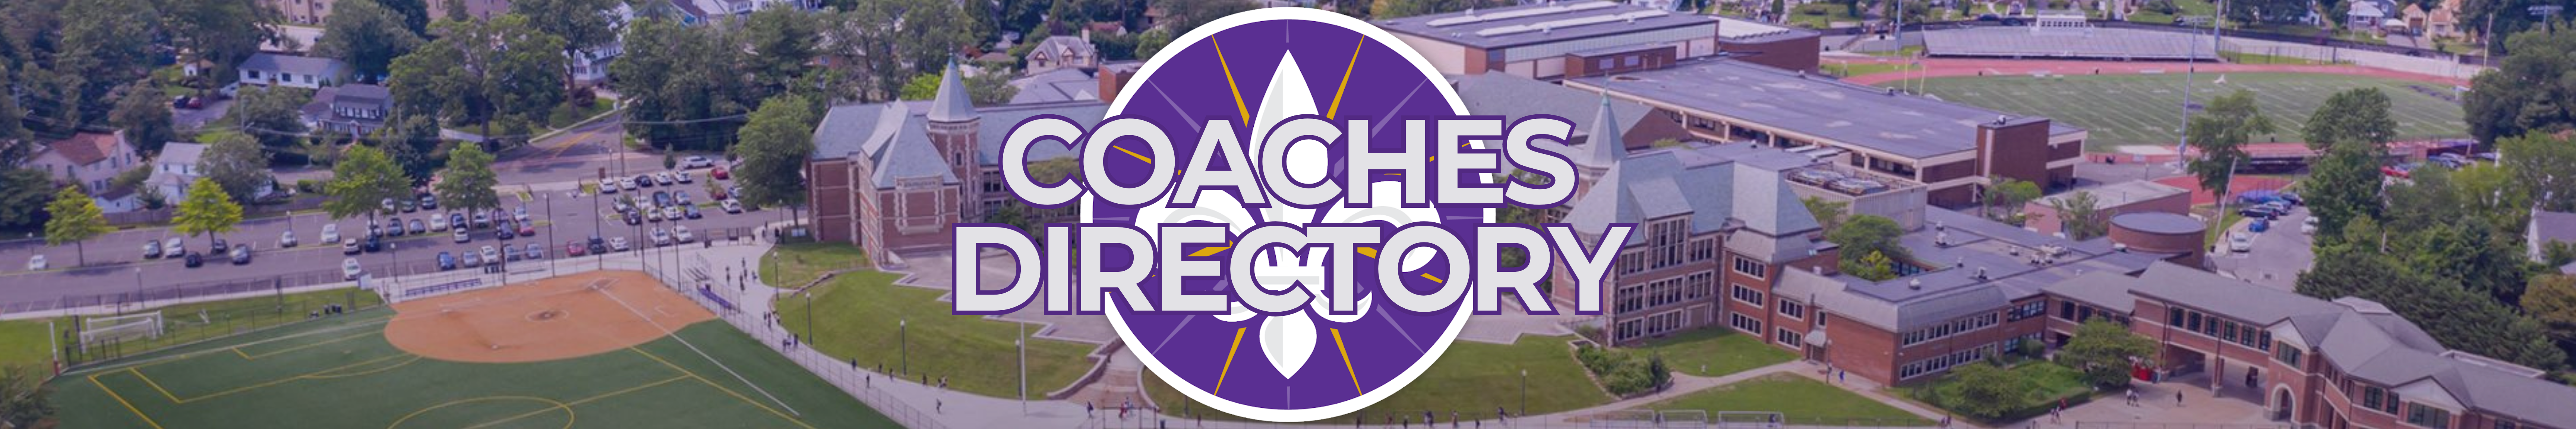 coaches directory banner